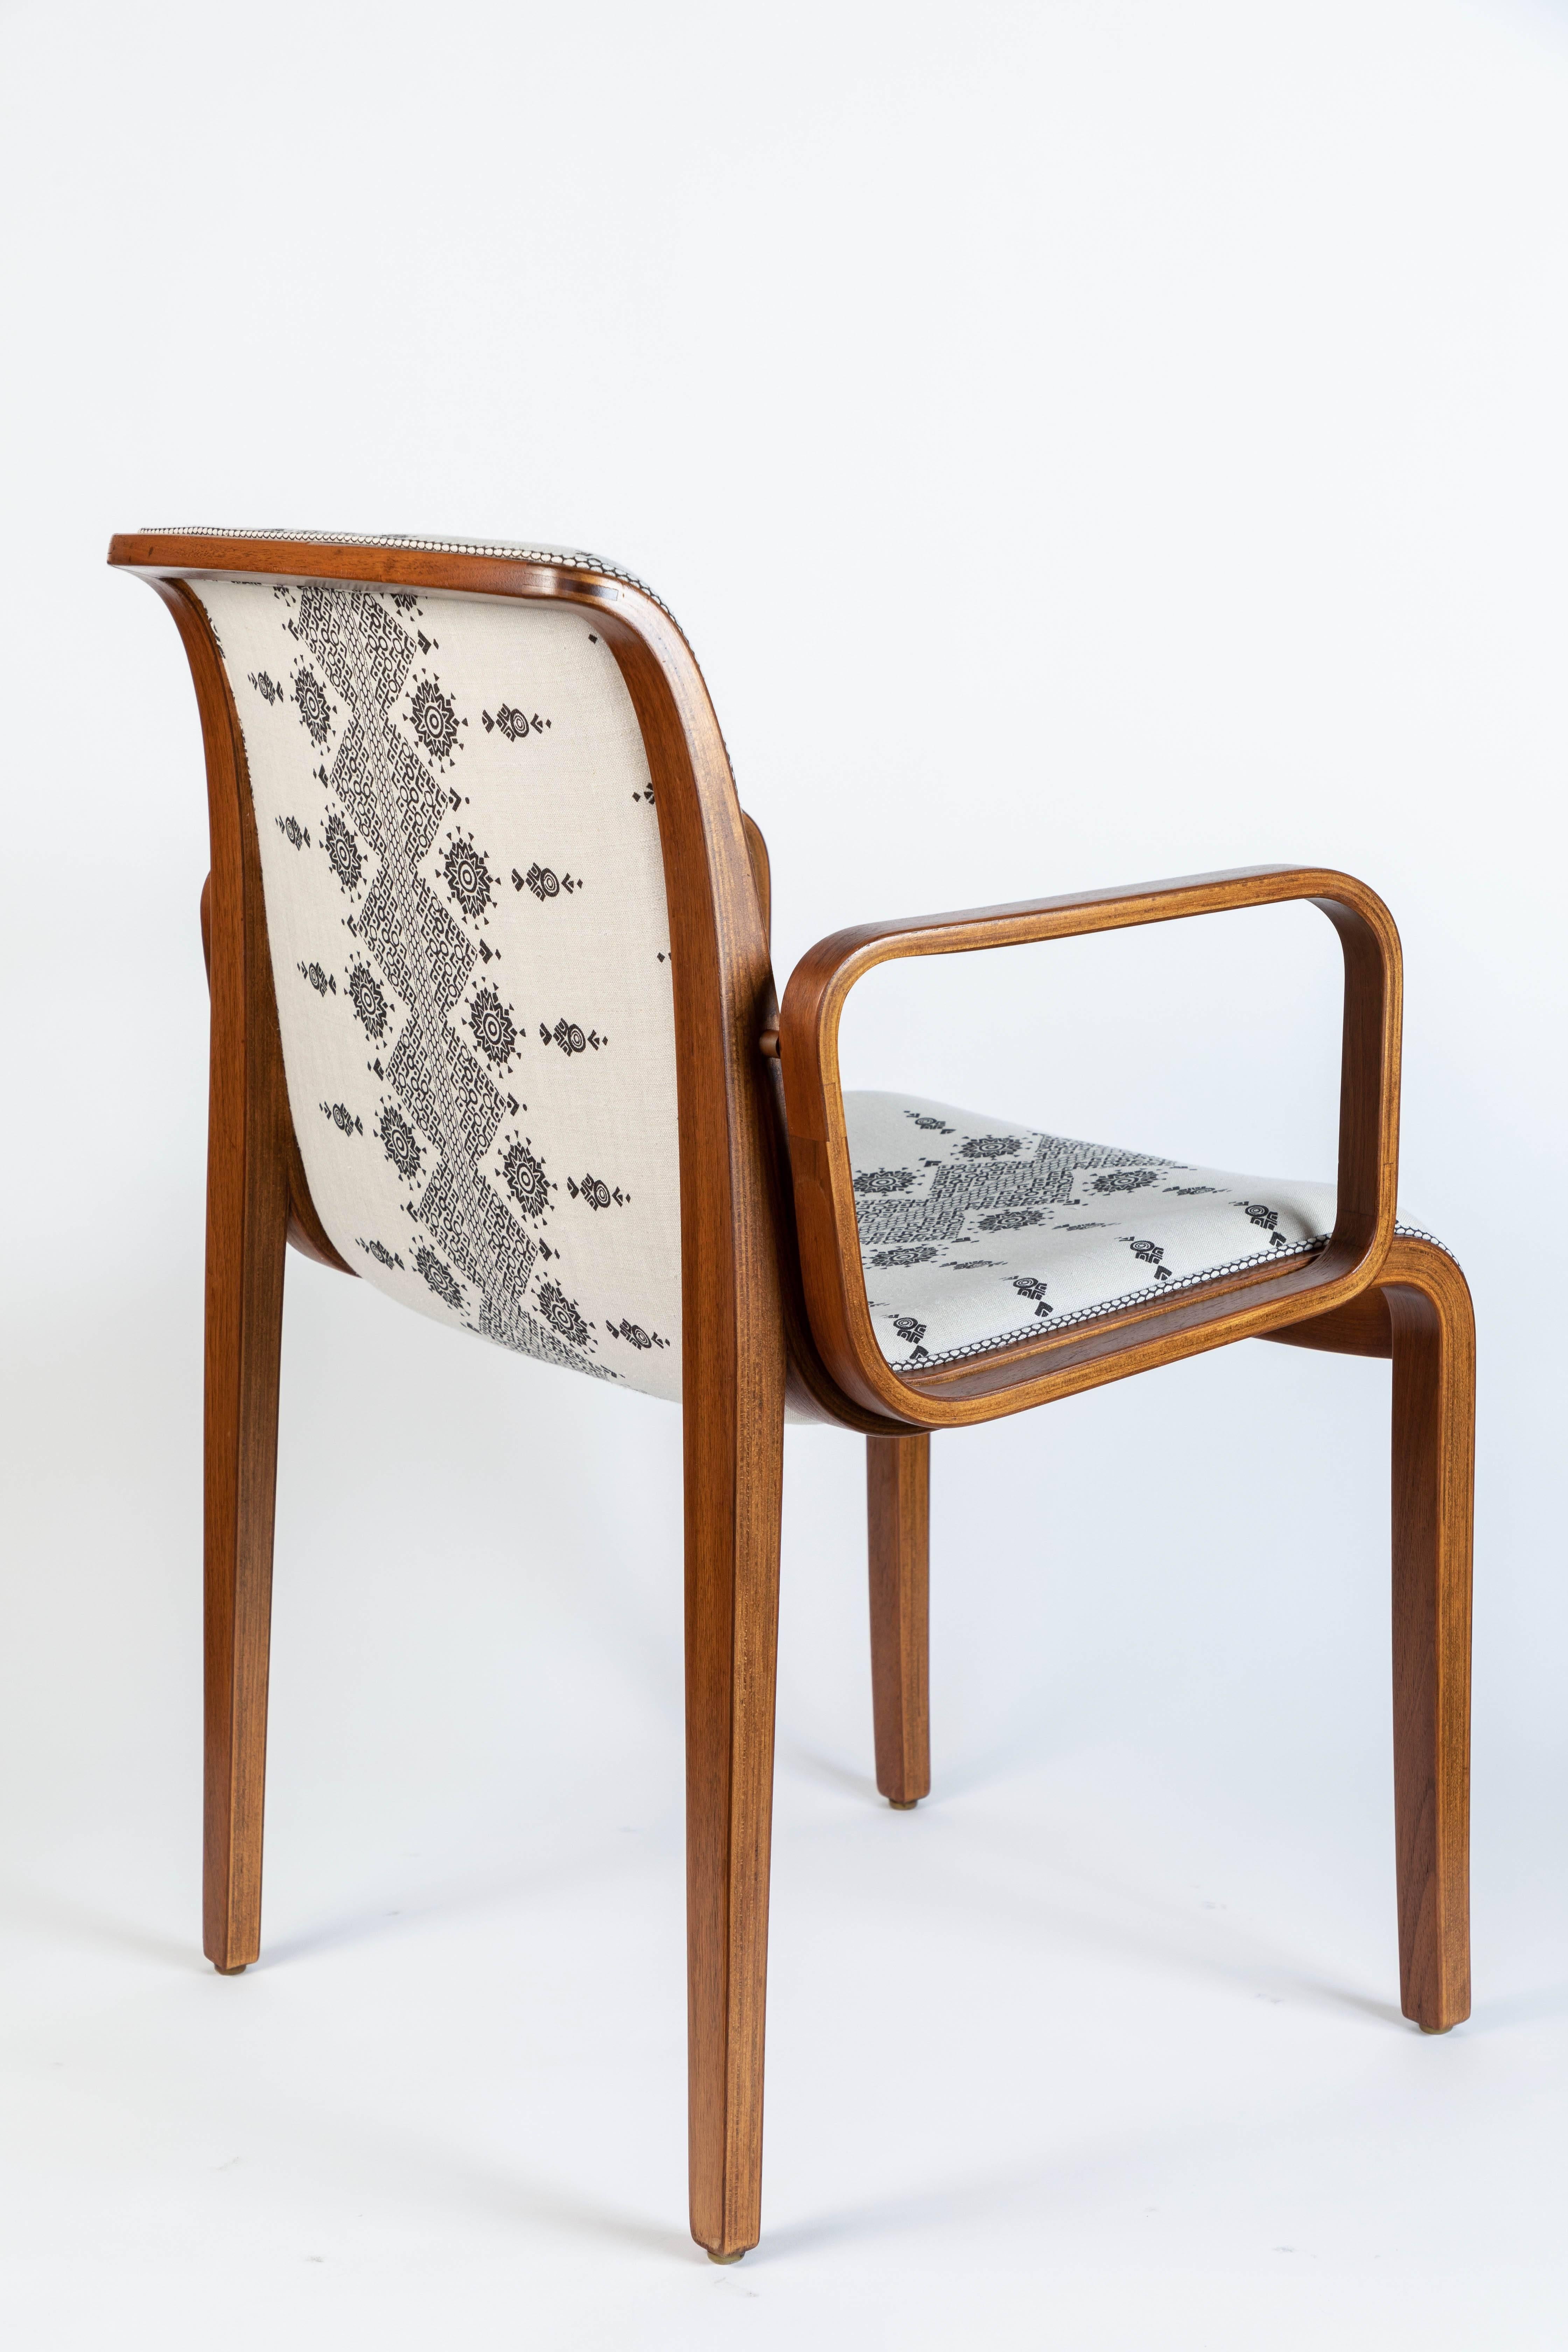 Midcentury Bentwood Armchair Newly Upholstered in Peter Dunham Linen 3